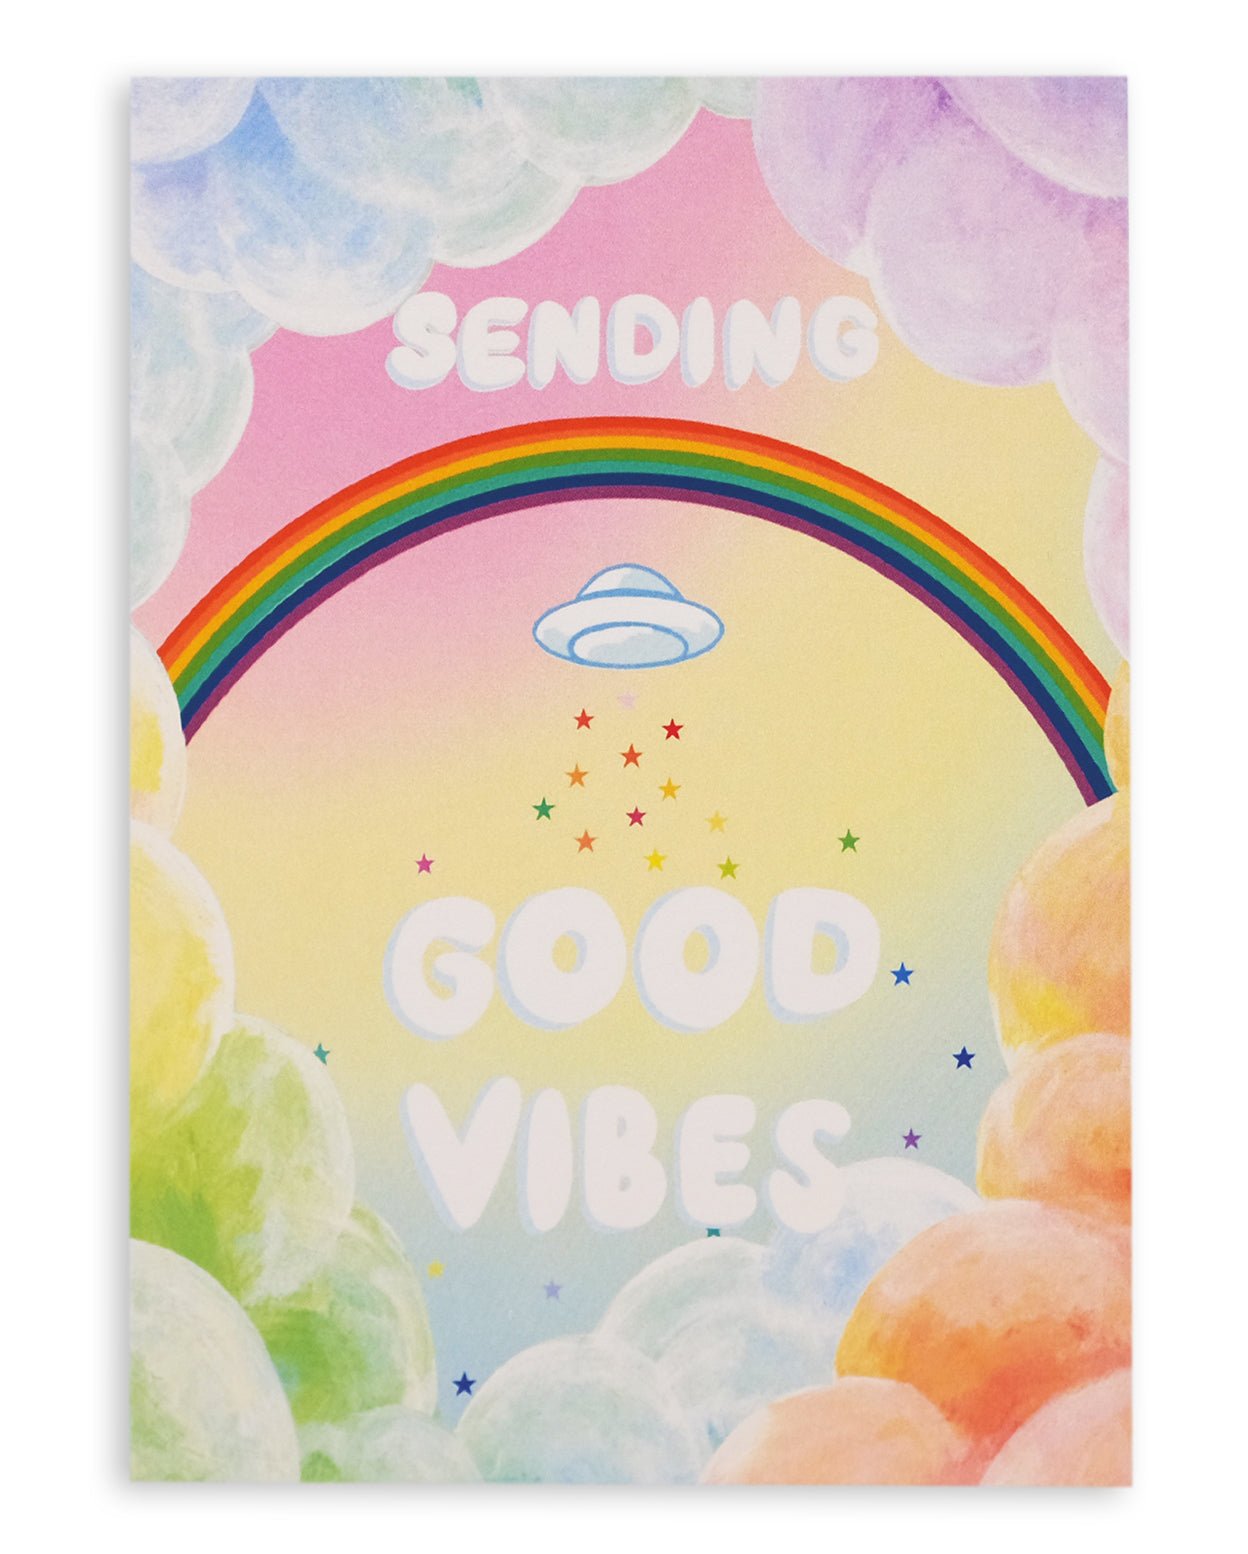 Colorful greeting card with cumulus clouds surrounding a rainbow with a UFO below it, followed by rainbow stars and clouds, and the words &quot;Sending Good Vibes&quot; on the front. Shown against a white background.